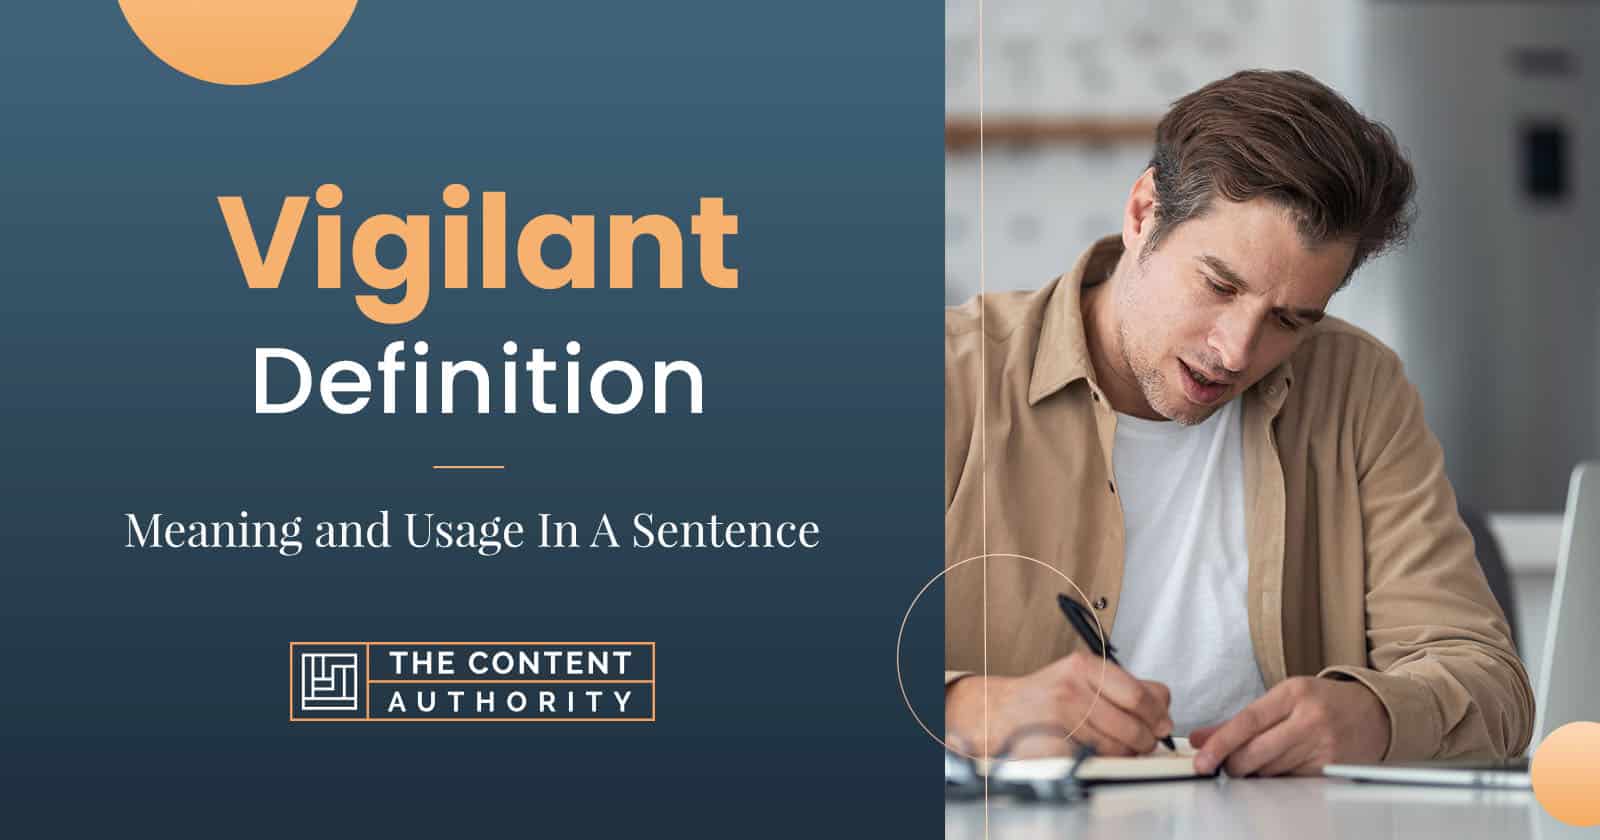 Vigilant Definition – Meaning and Usage In A Sentence